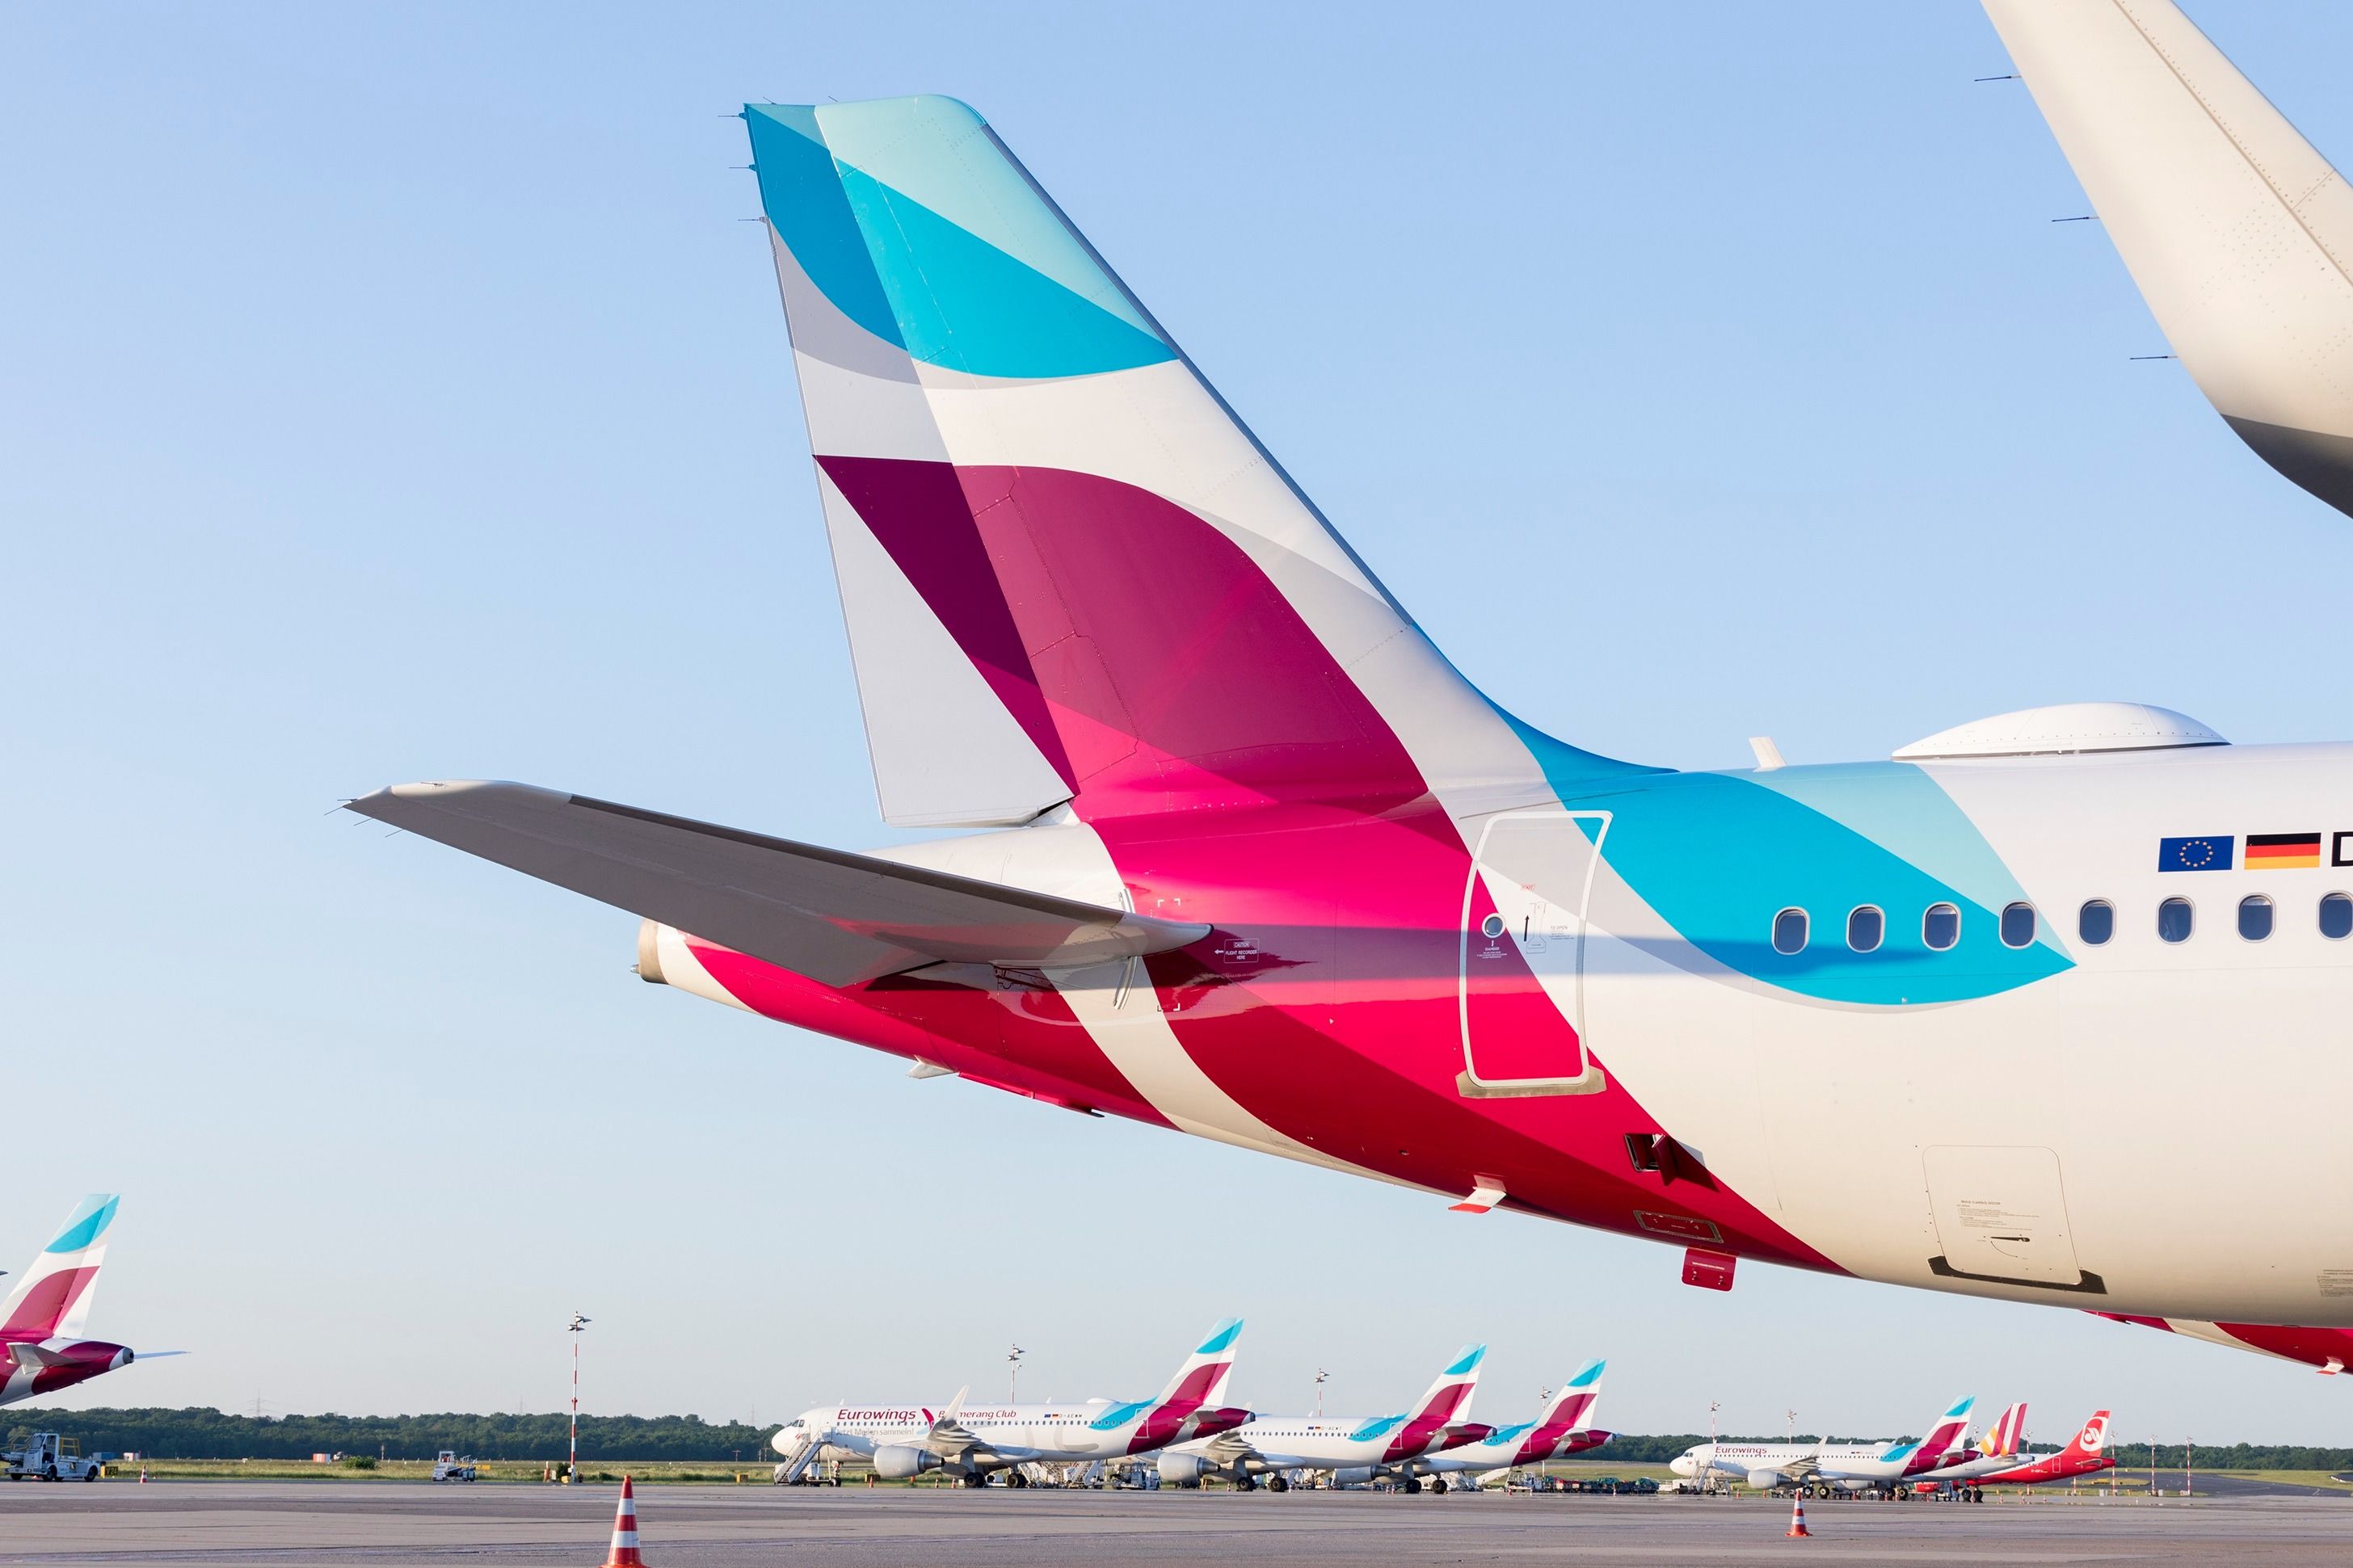 Eurowings aircraft tails